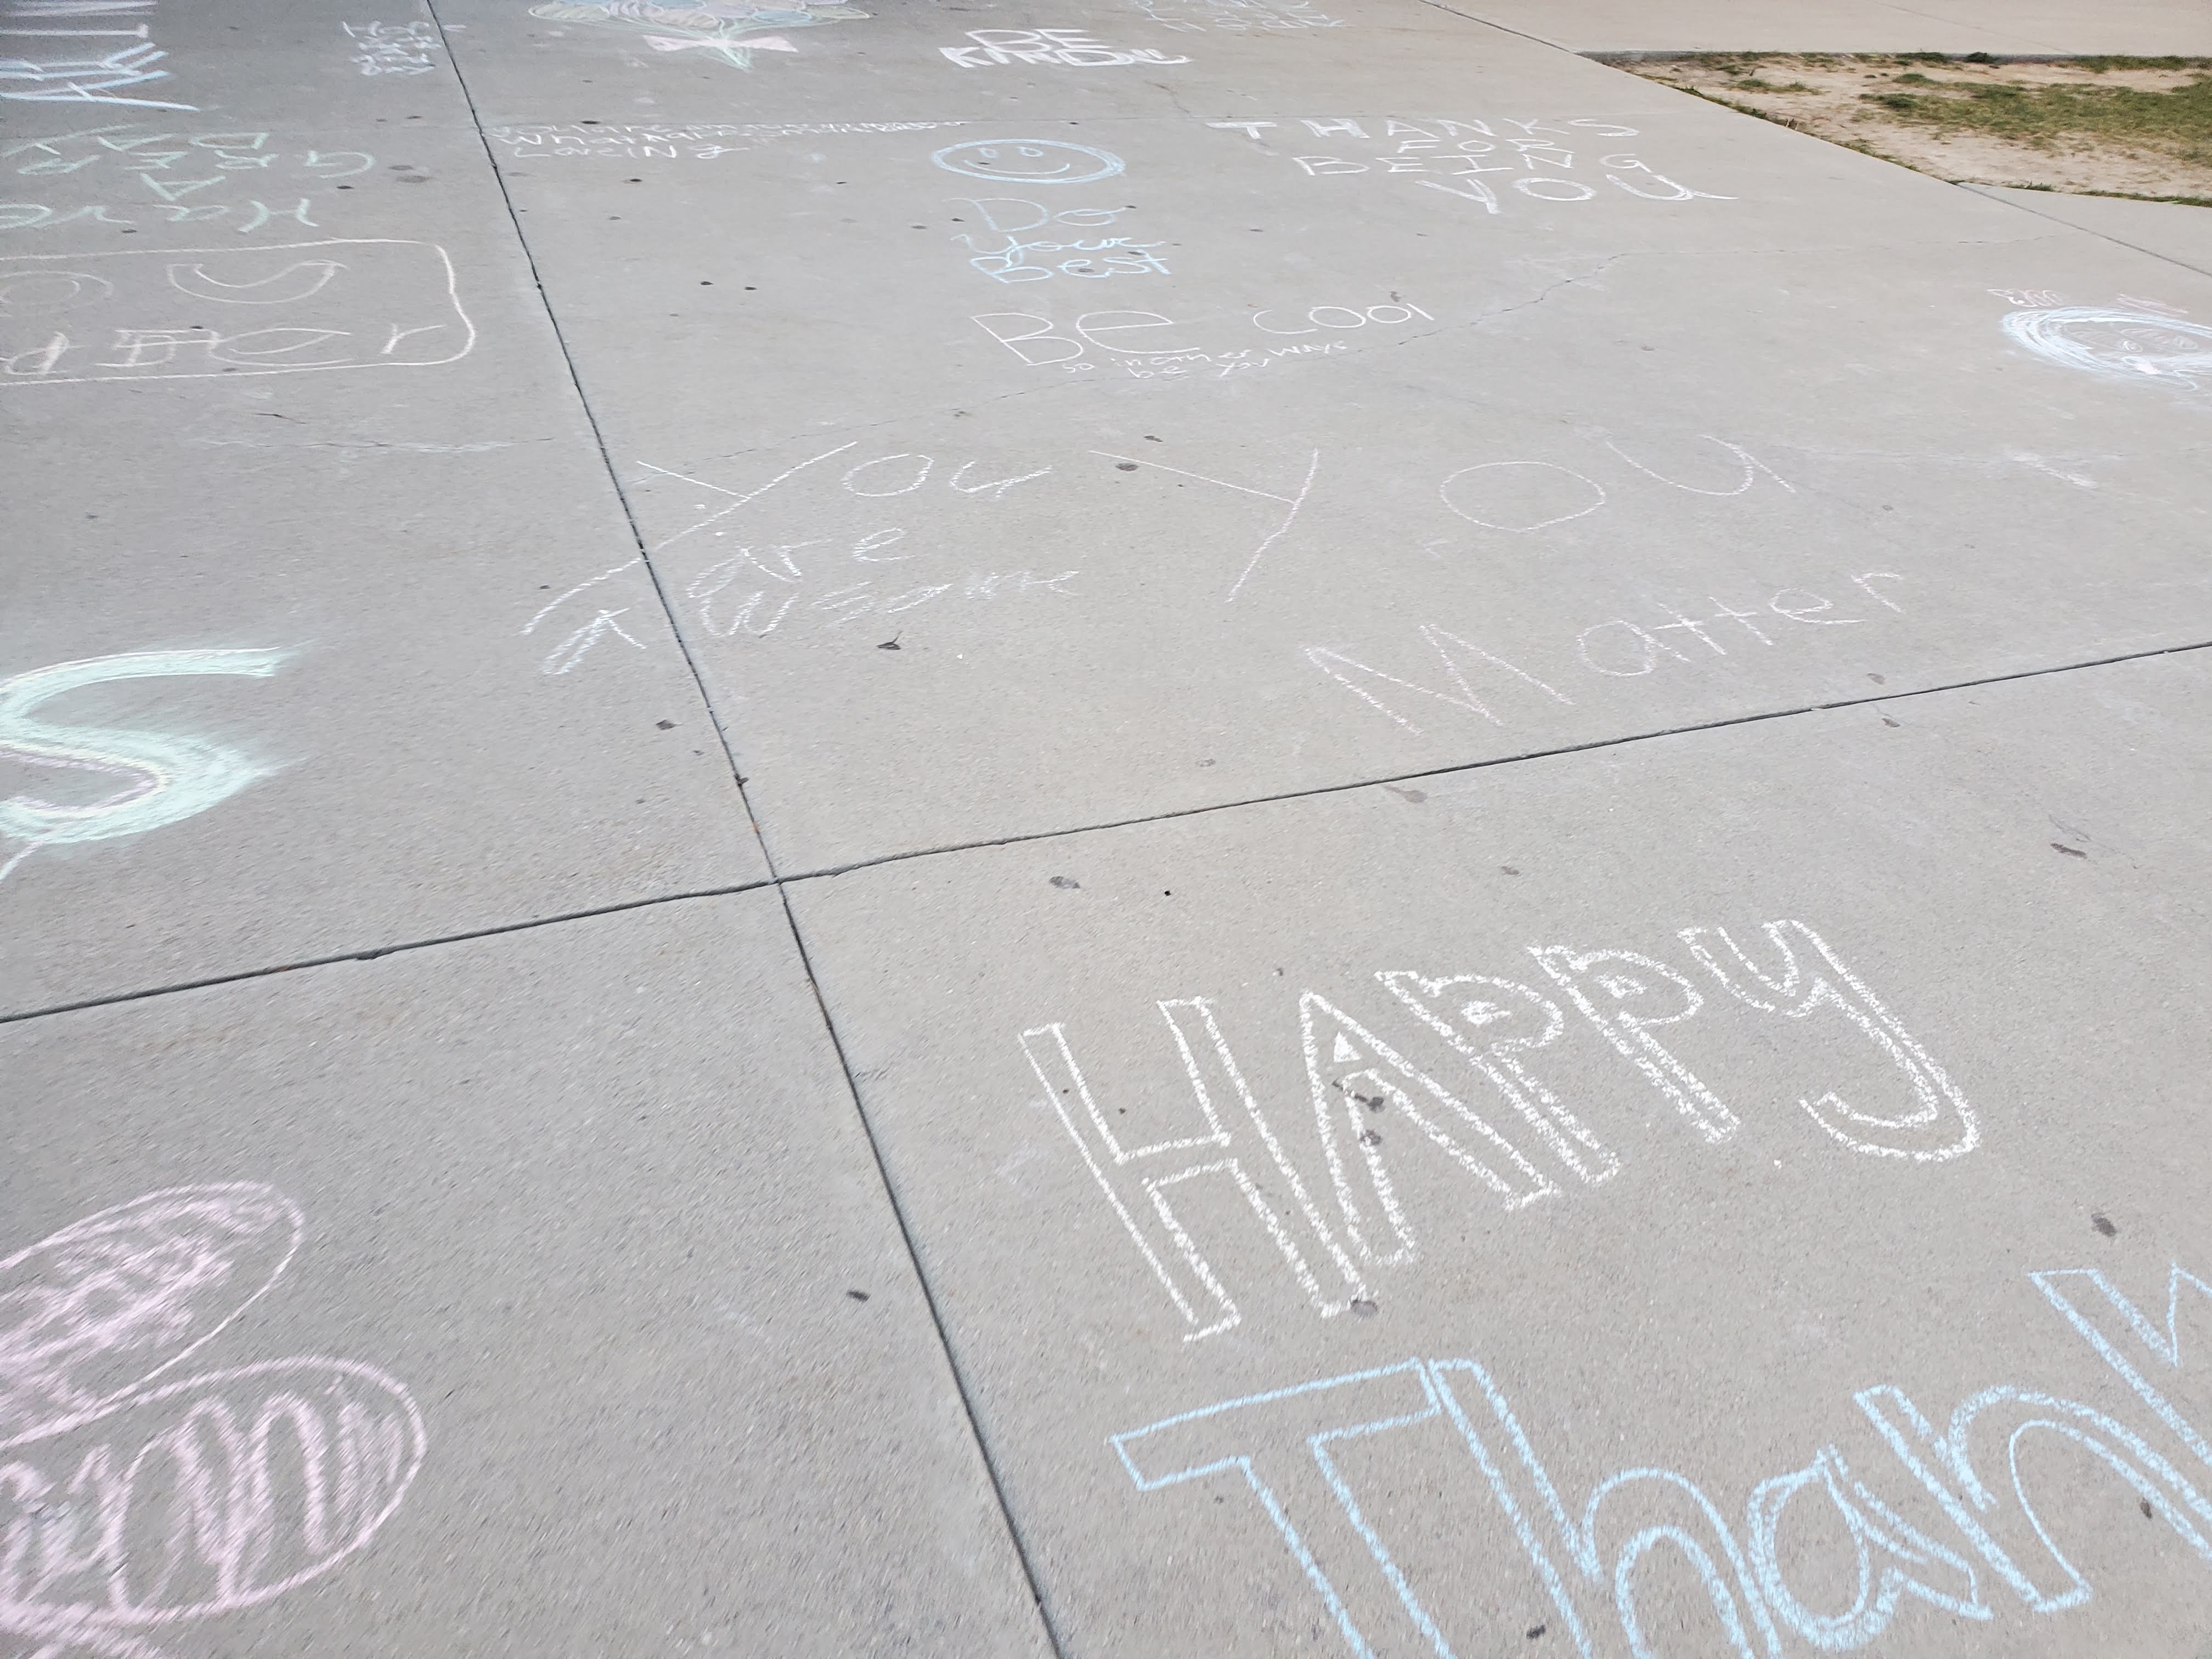 Chalk messages on the front steps at DFMS